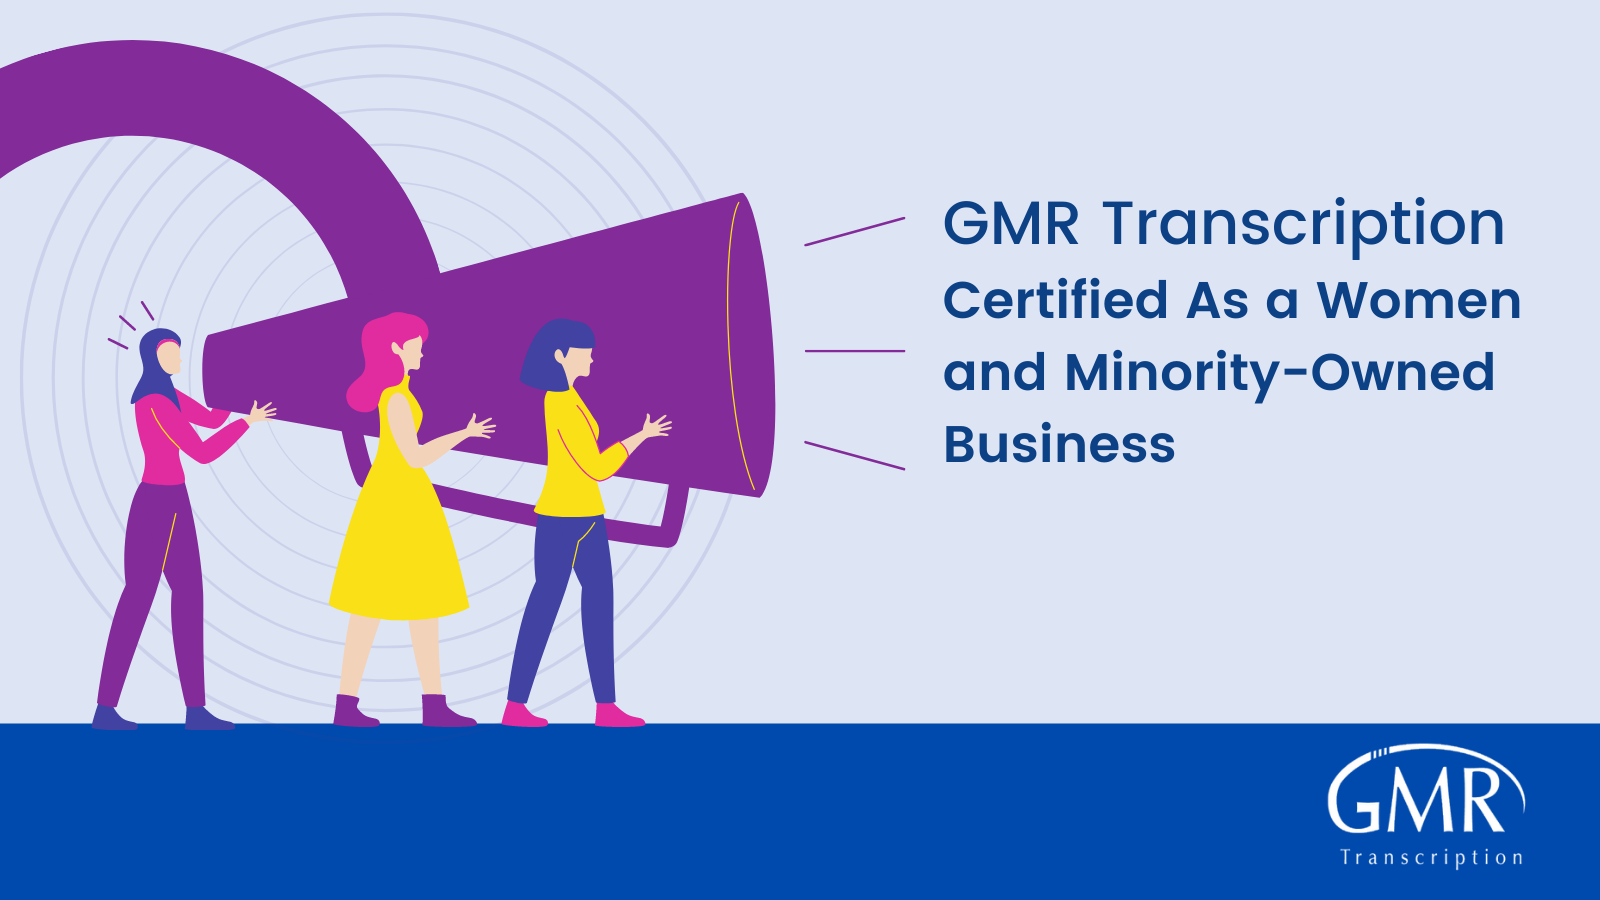 GMR Transcription Certified As a Women and Minority-Owned Business